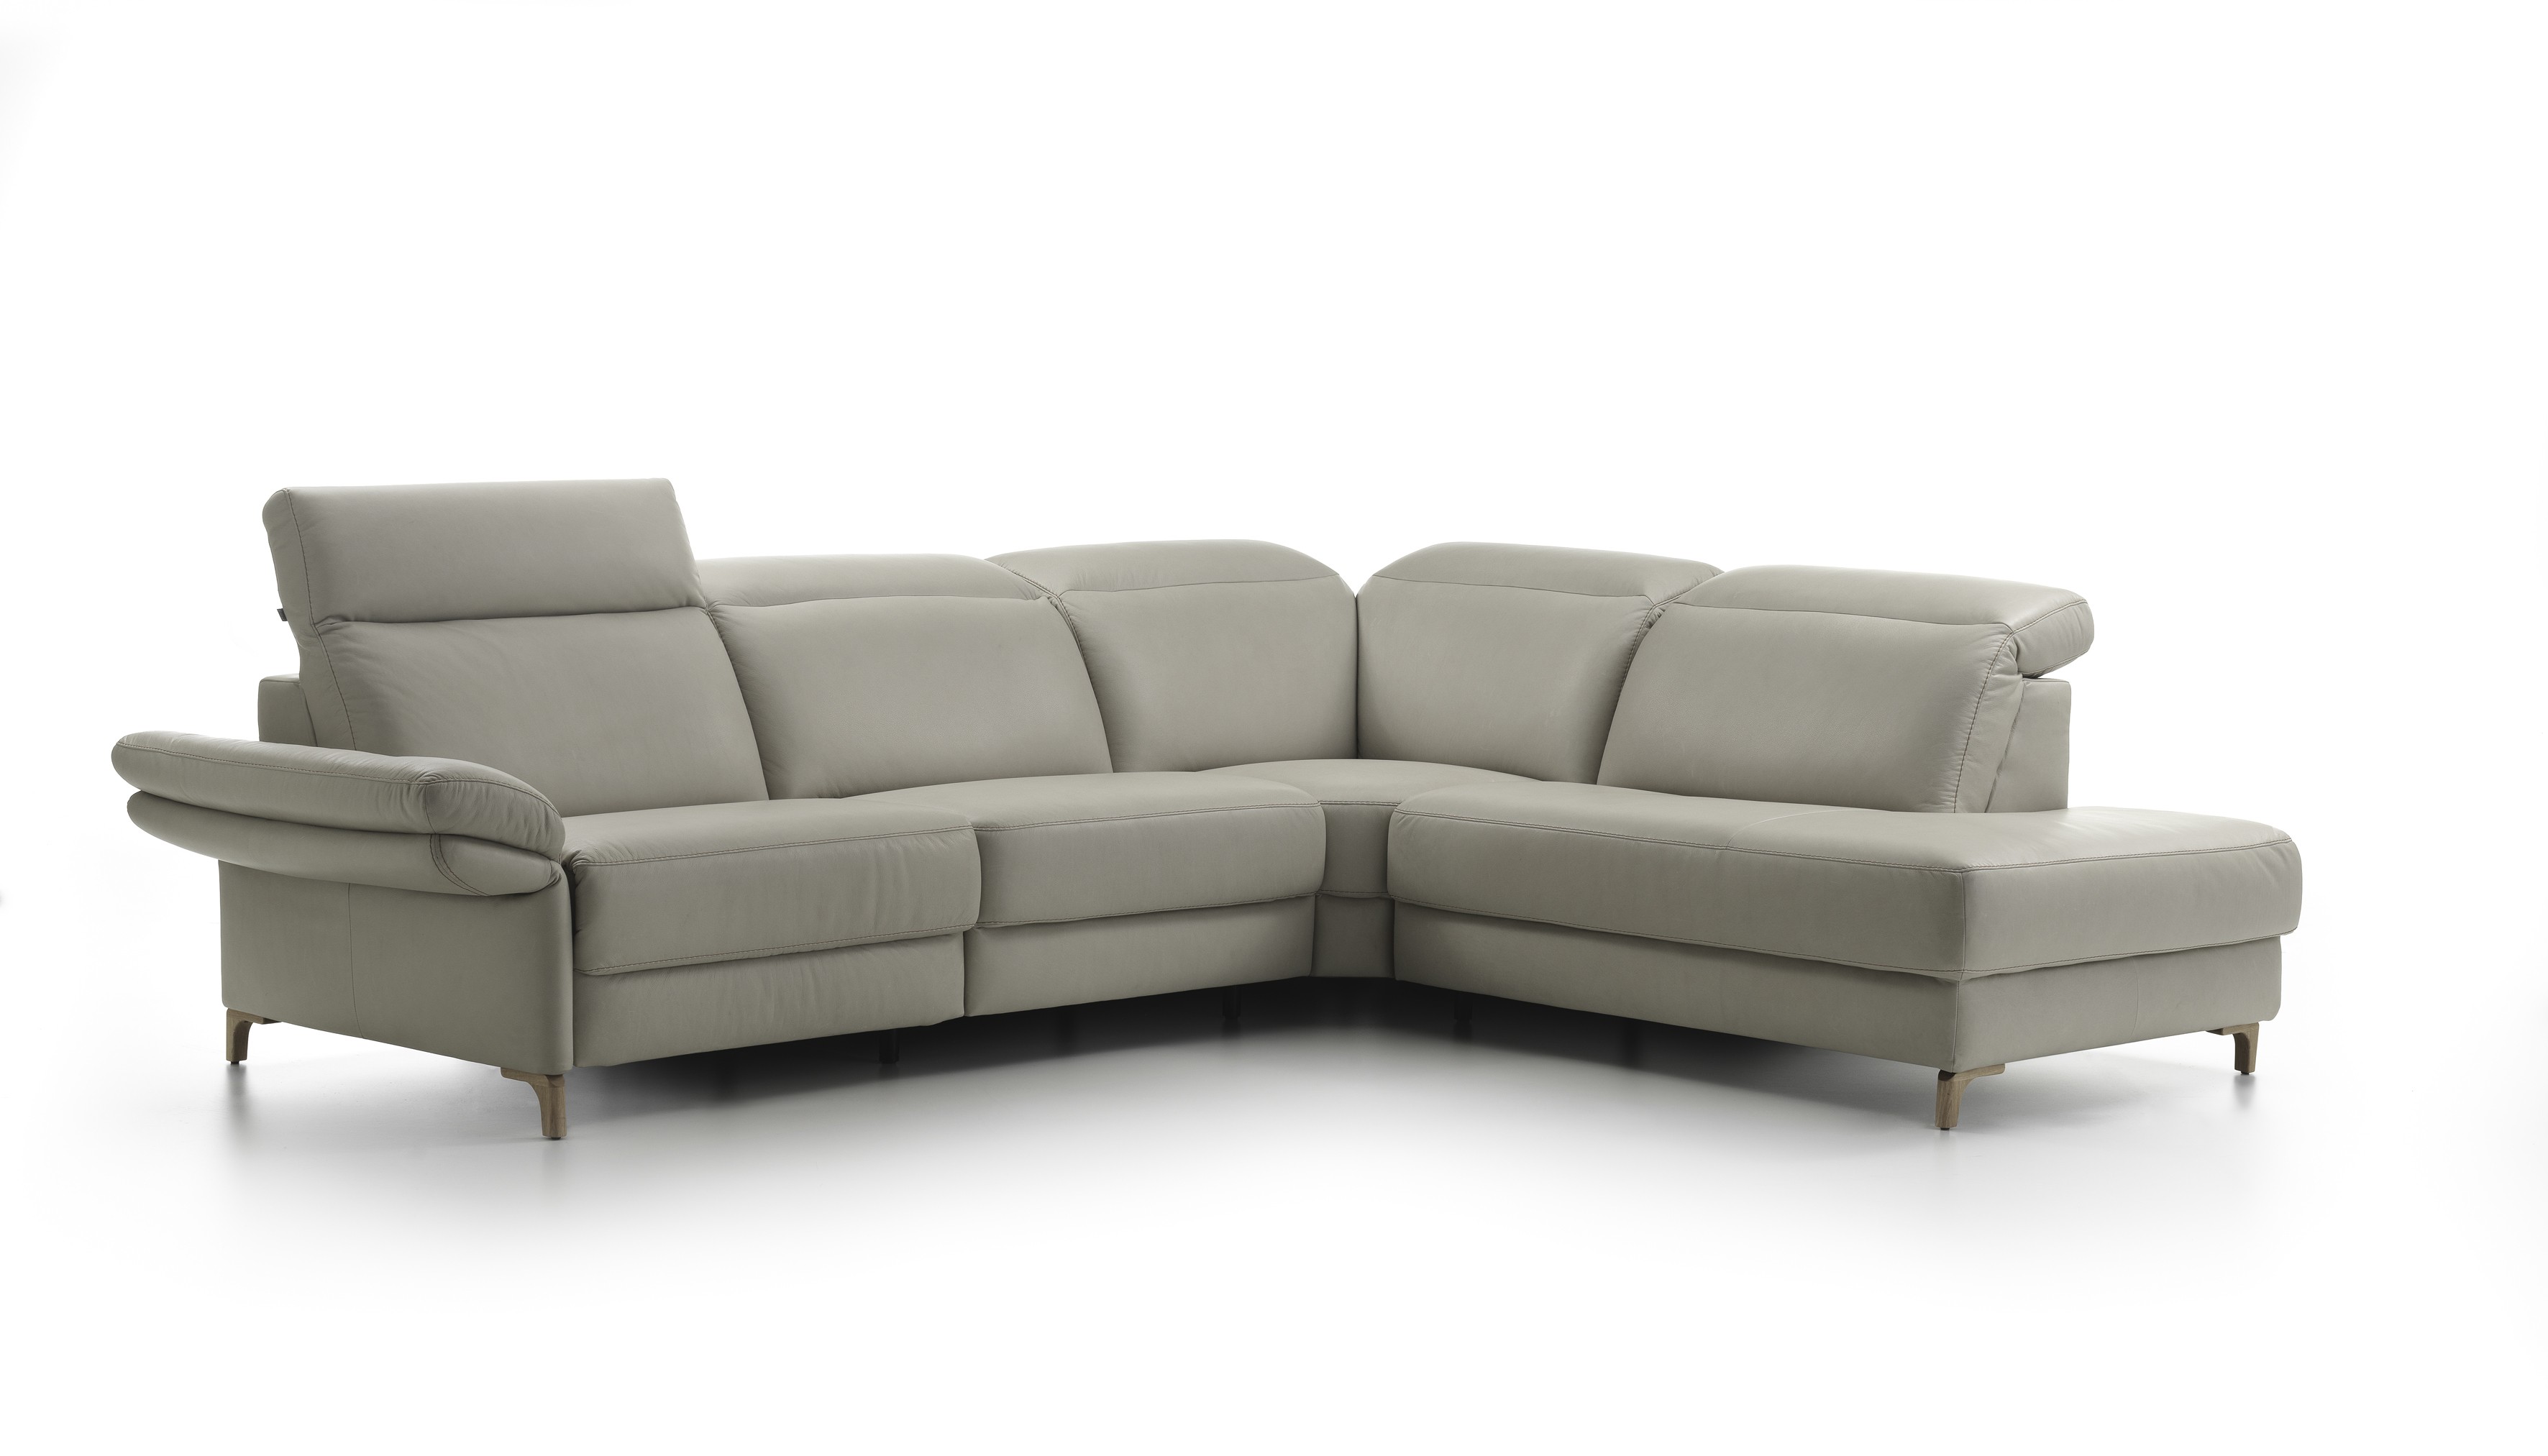 Minerva I Leather Sectional | Rom | Made in Belgium